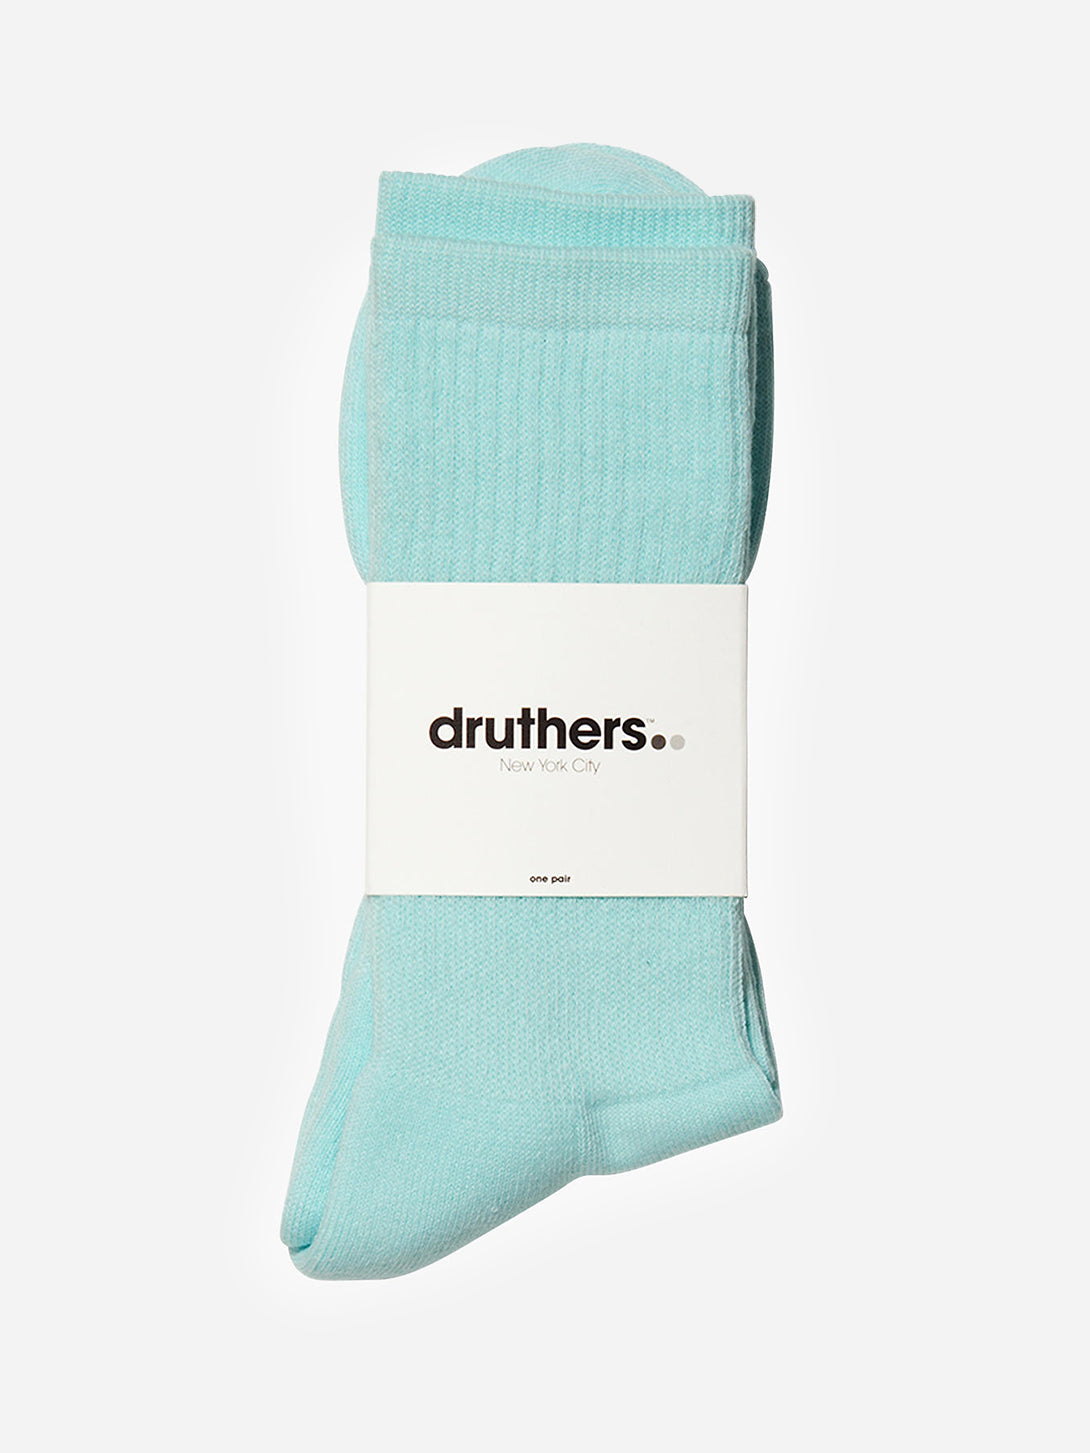 Mint druthers socks for ons clothing